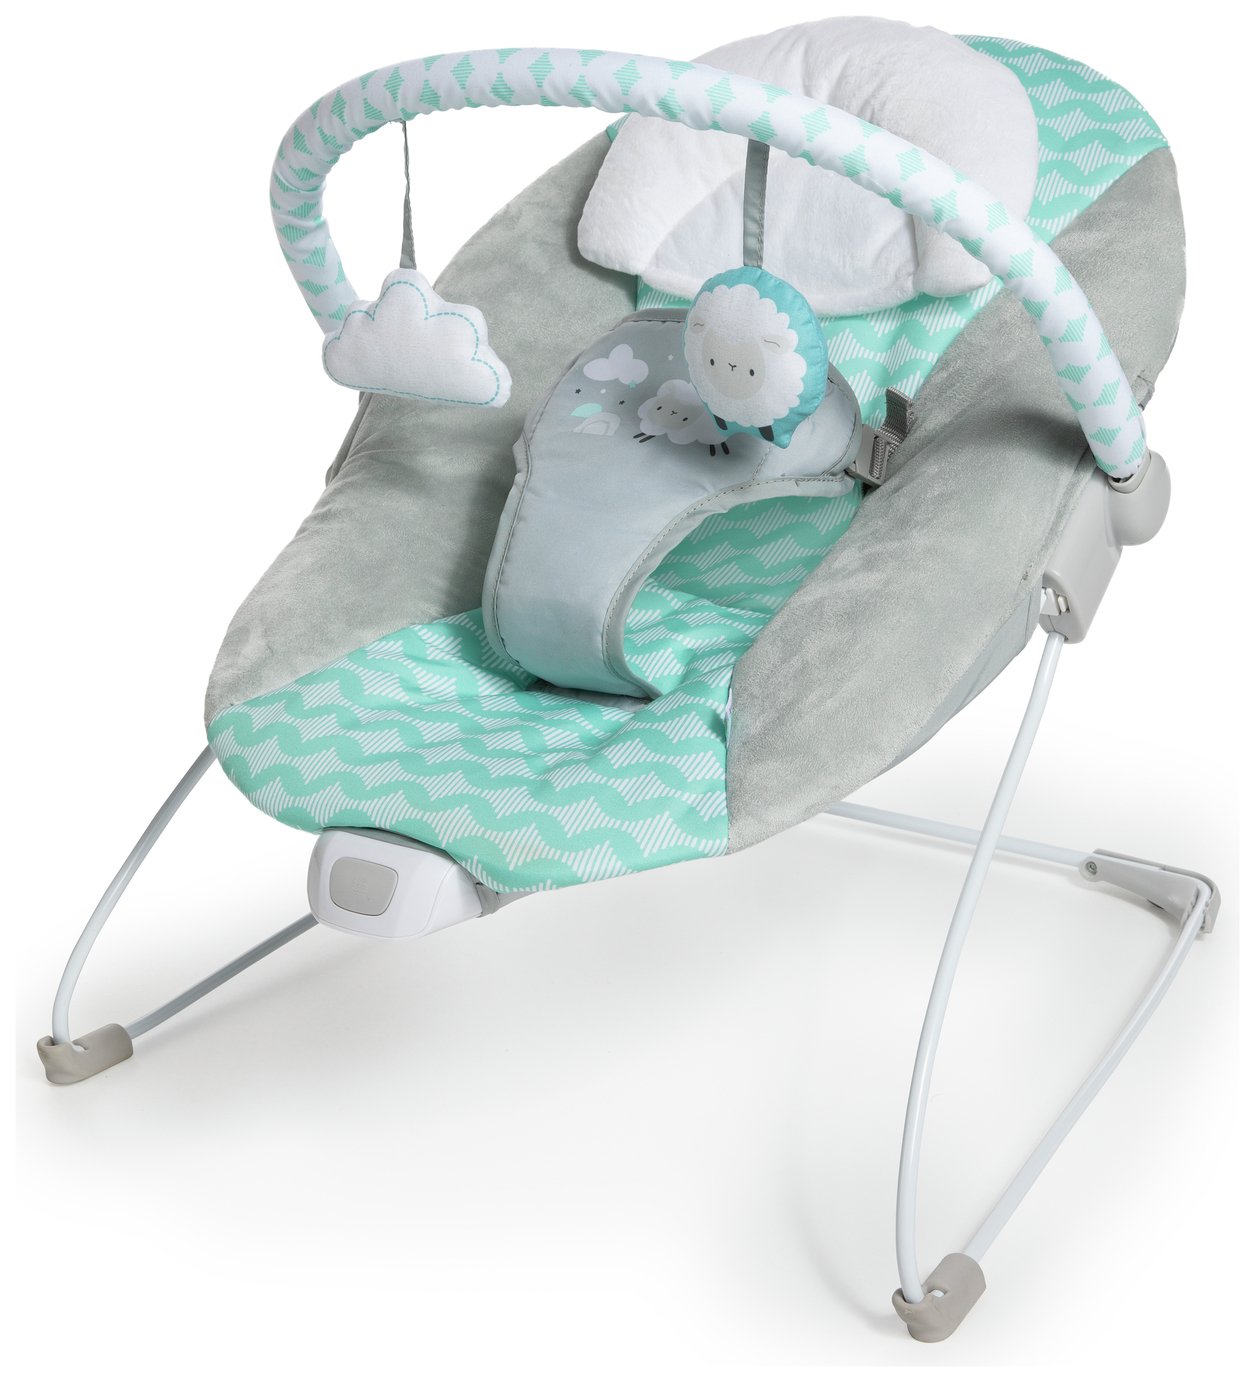 Ity by Ingenuity Bouncity Bounce Vibrating Deluxe Bouncer review